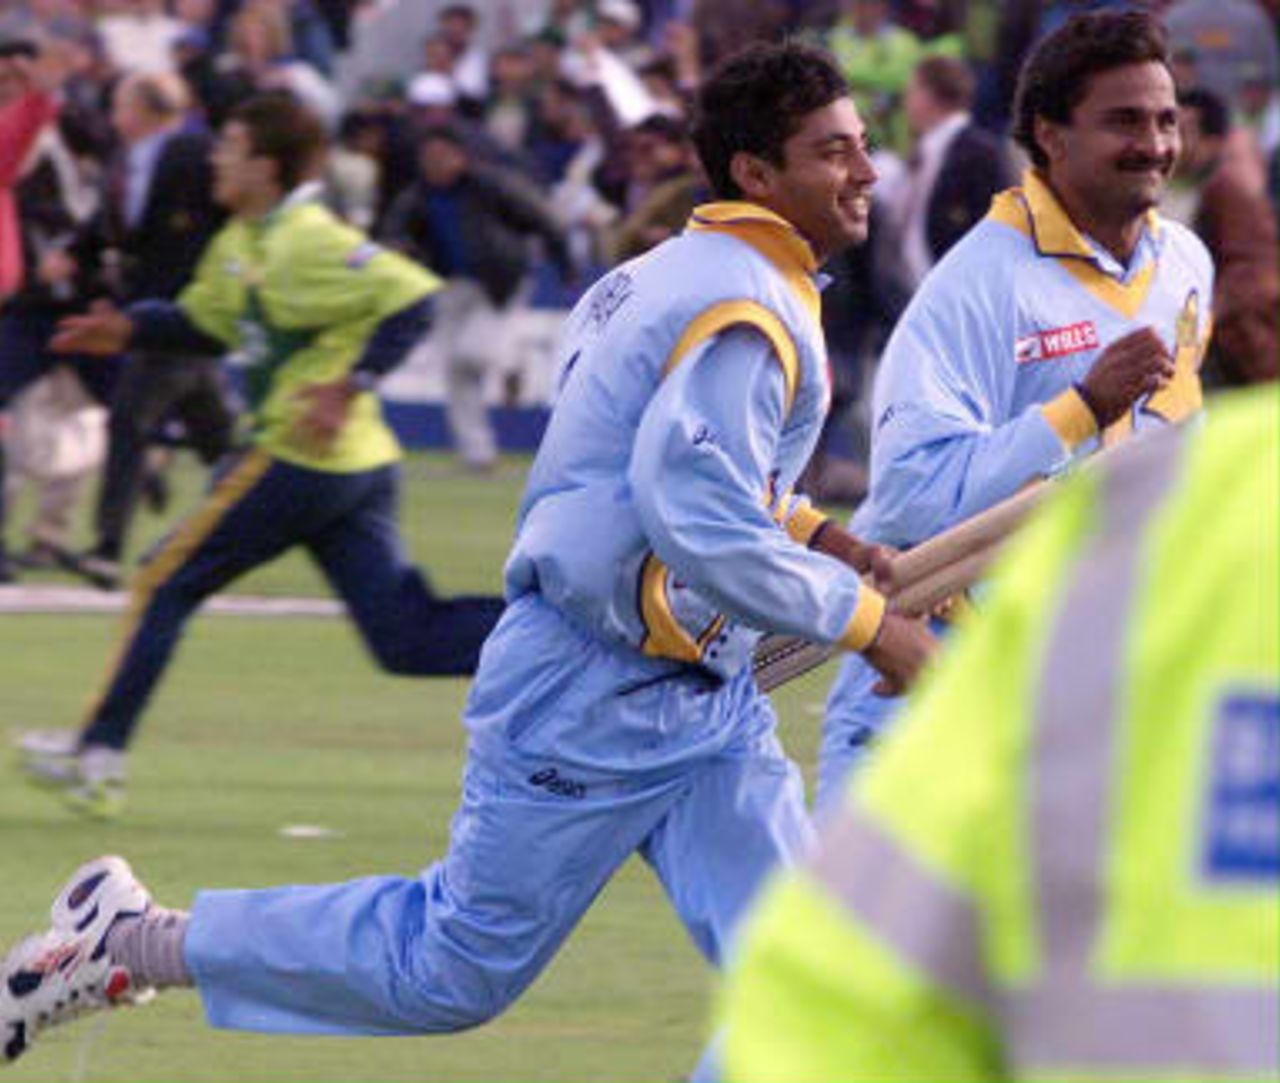 Indian players, Ajay Jadeja and Javagal Srinath run for the protection of the Pavilion at the end of the match against Pakistan in the cricket World Cup series match at Old Trafford. 08 June 1999.